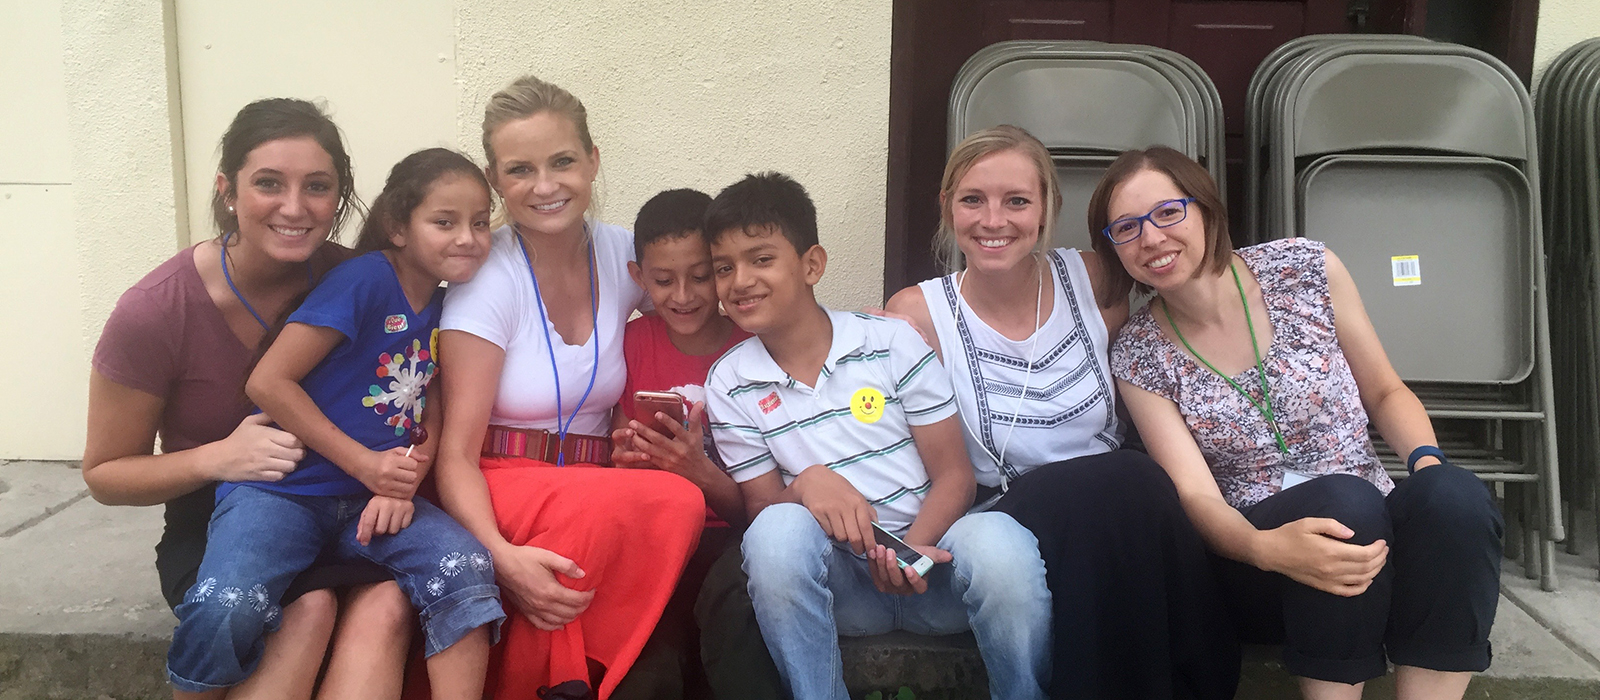 Husker audiology students pose with children after providing hearing services in Nicaragua